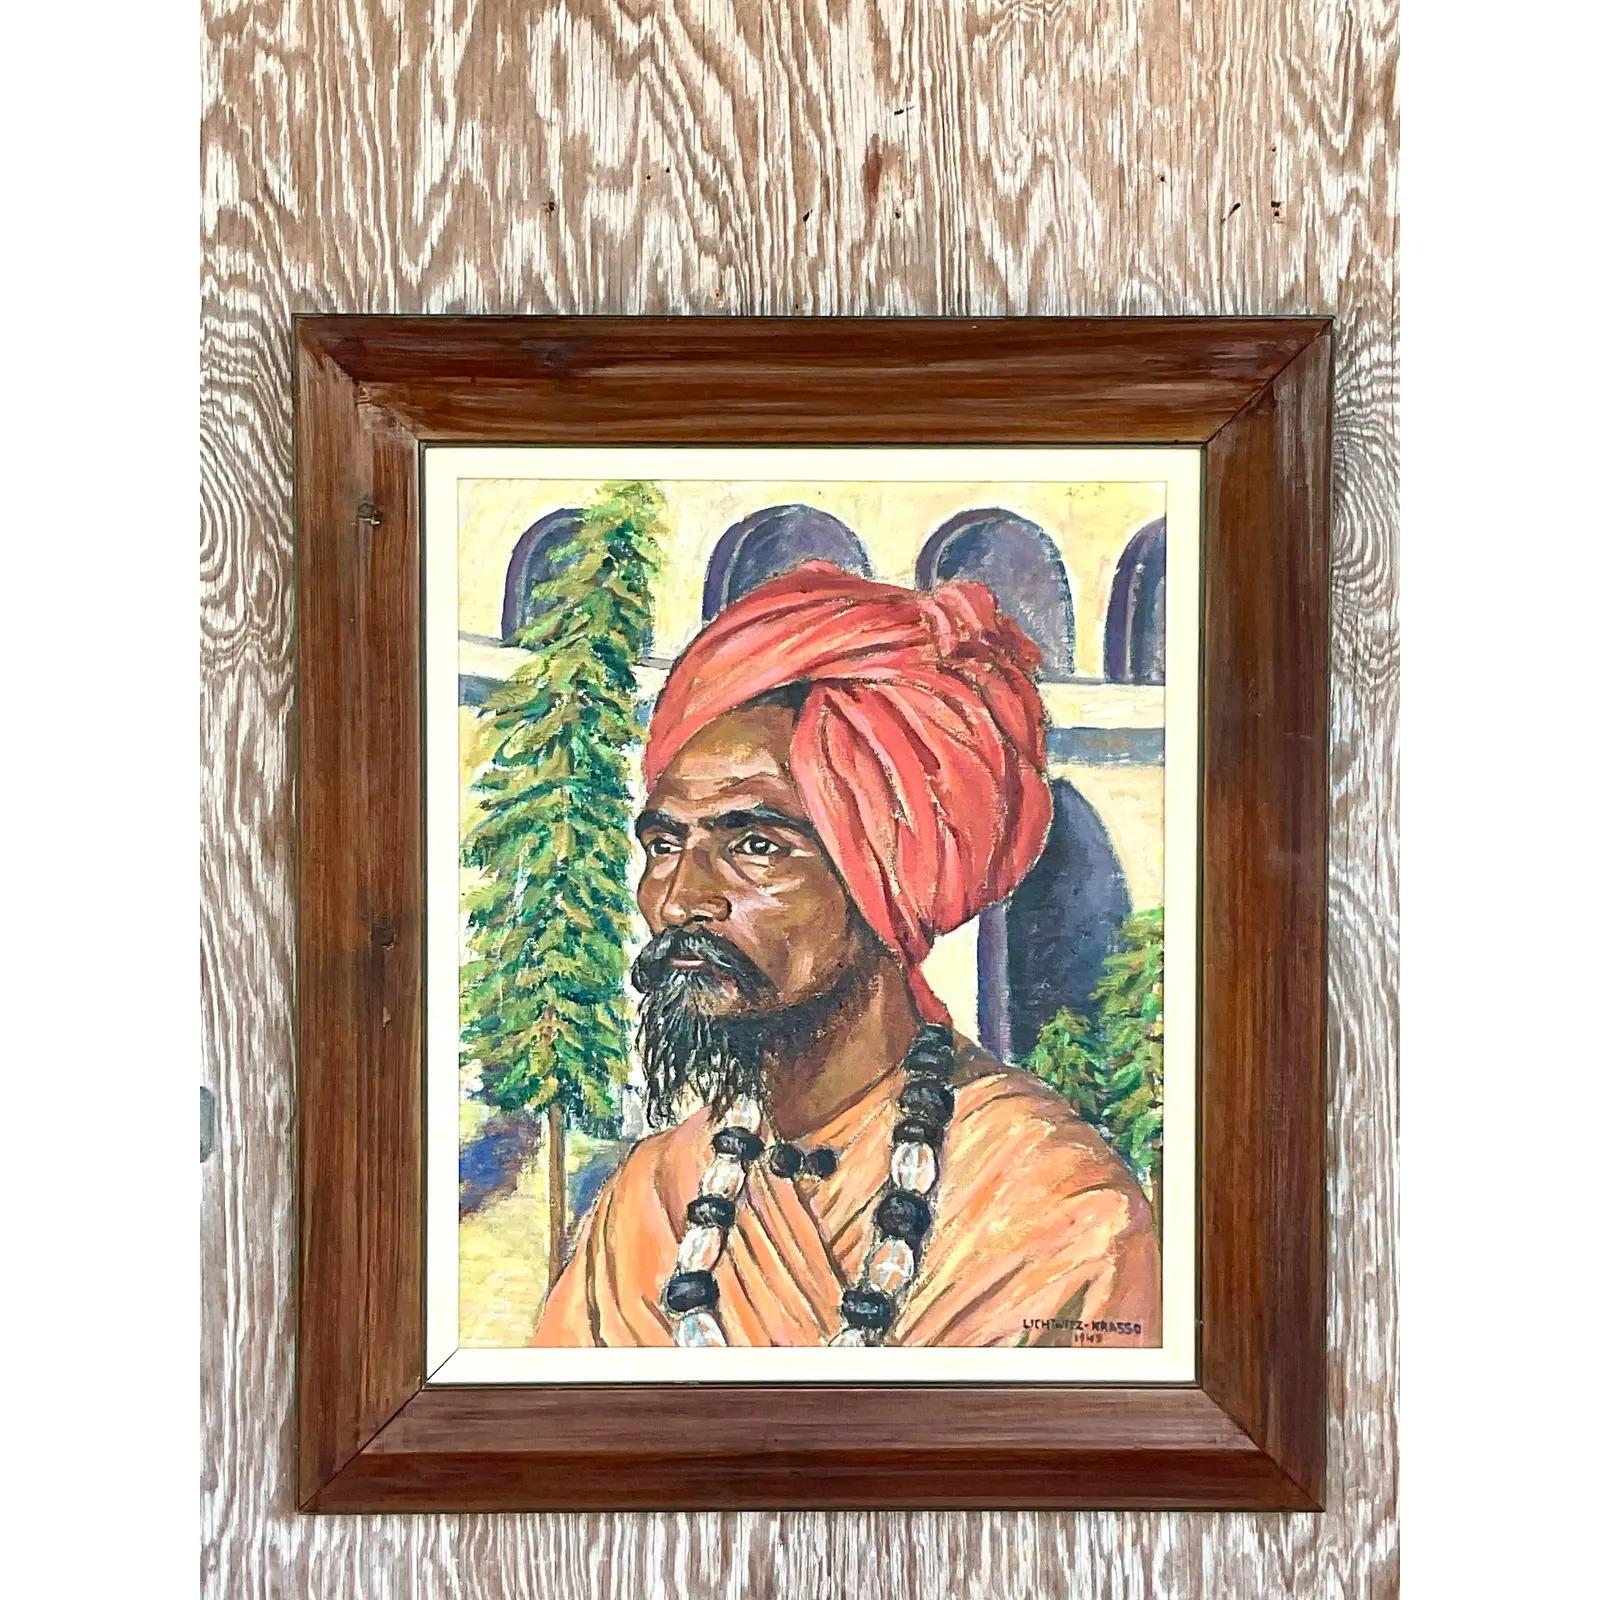 North American Vintage Boho Signed 1941 Original Oil Painting of Man in Turban For Sale